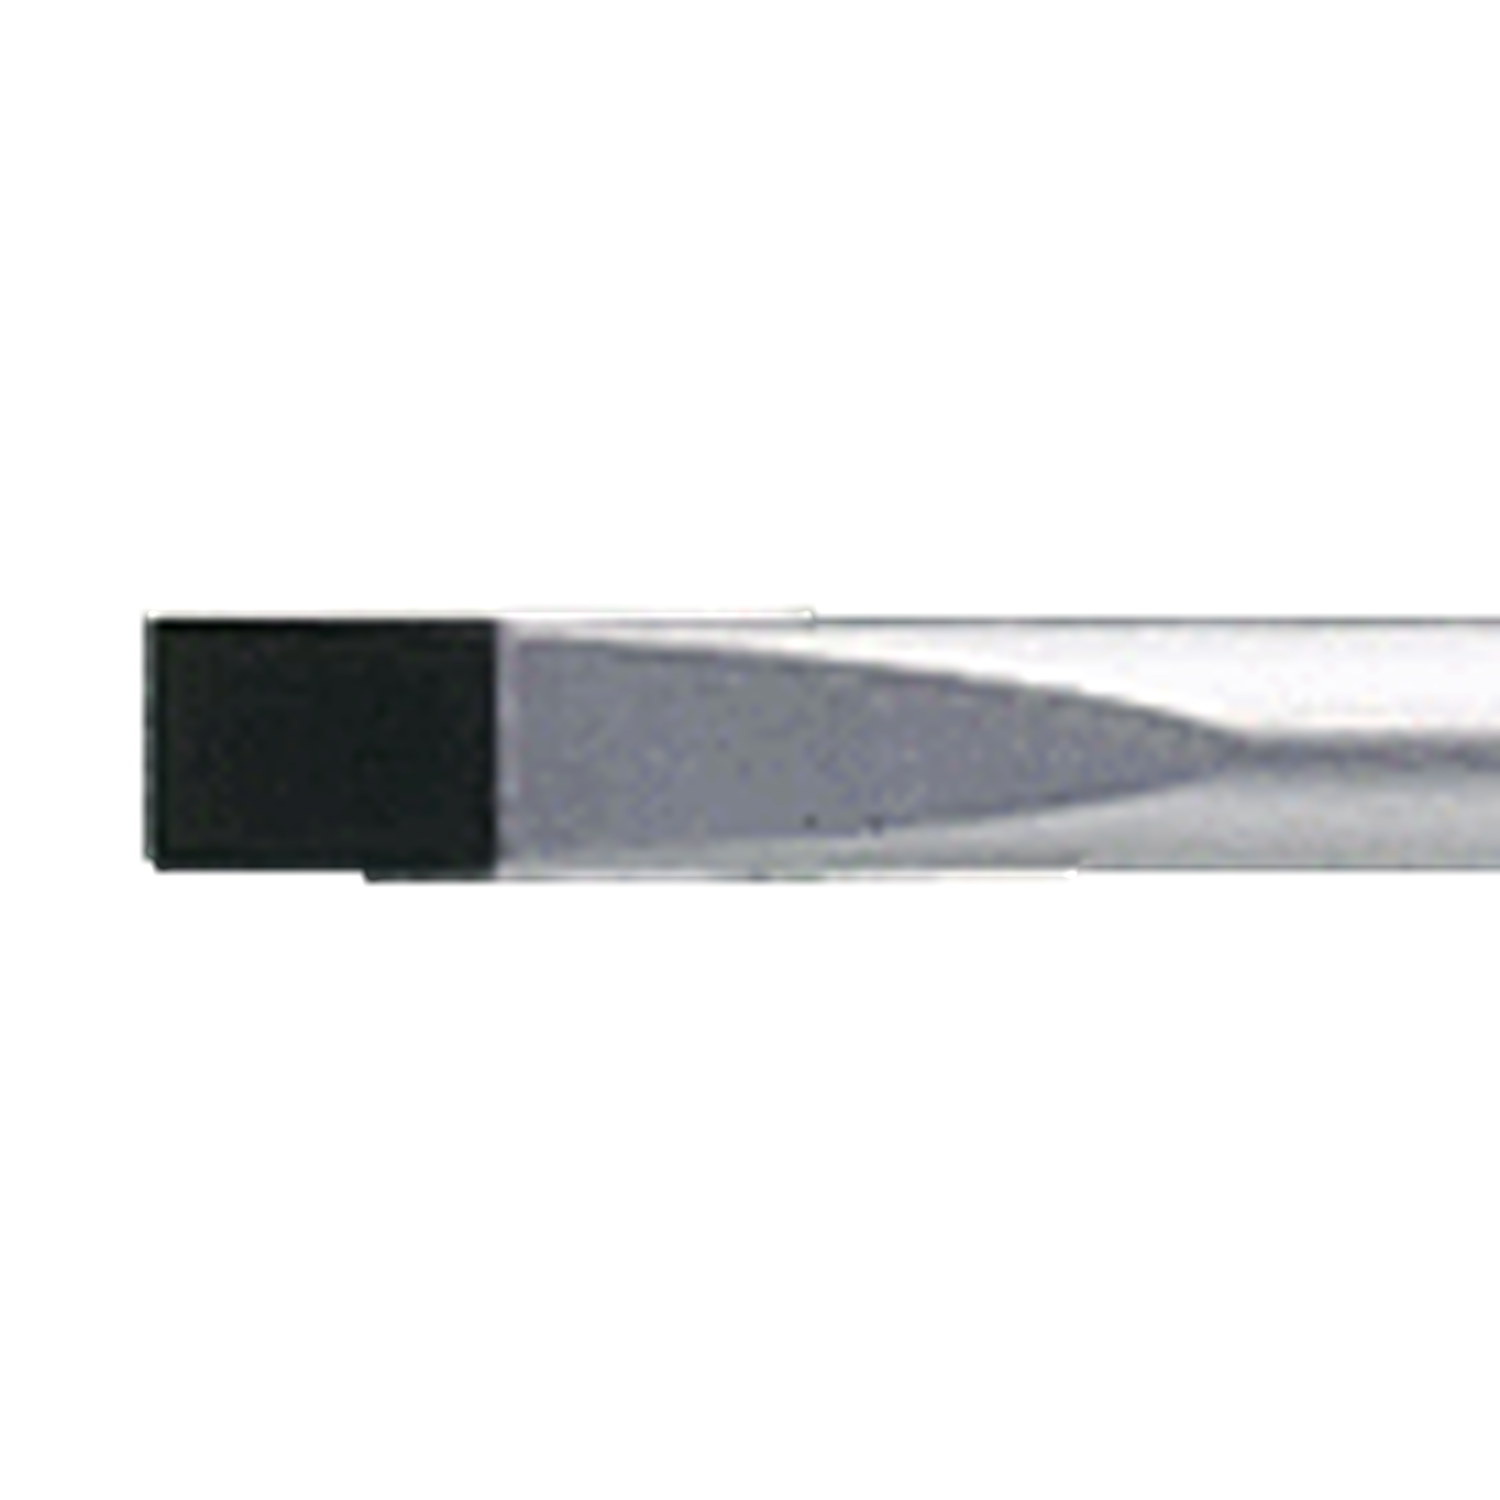 BAHCO TAHBE8020L-TAHBE8252 ERGO Slotted Screwdriver Safety Chuck - Premium Slotted Screwdriver from BAHCO - Shop now at Yew Aik.